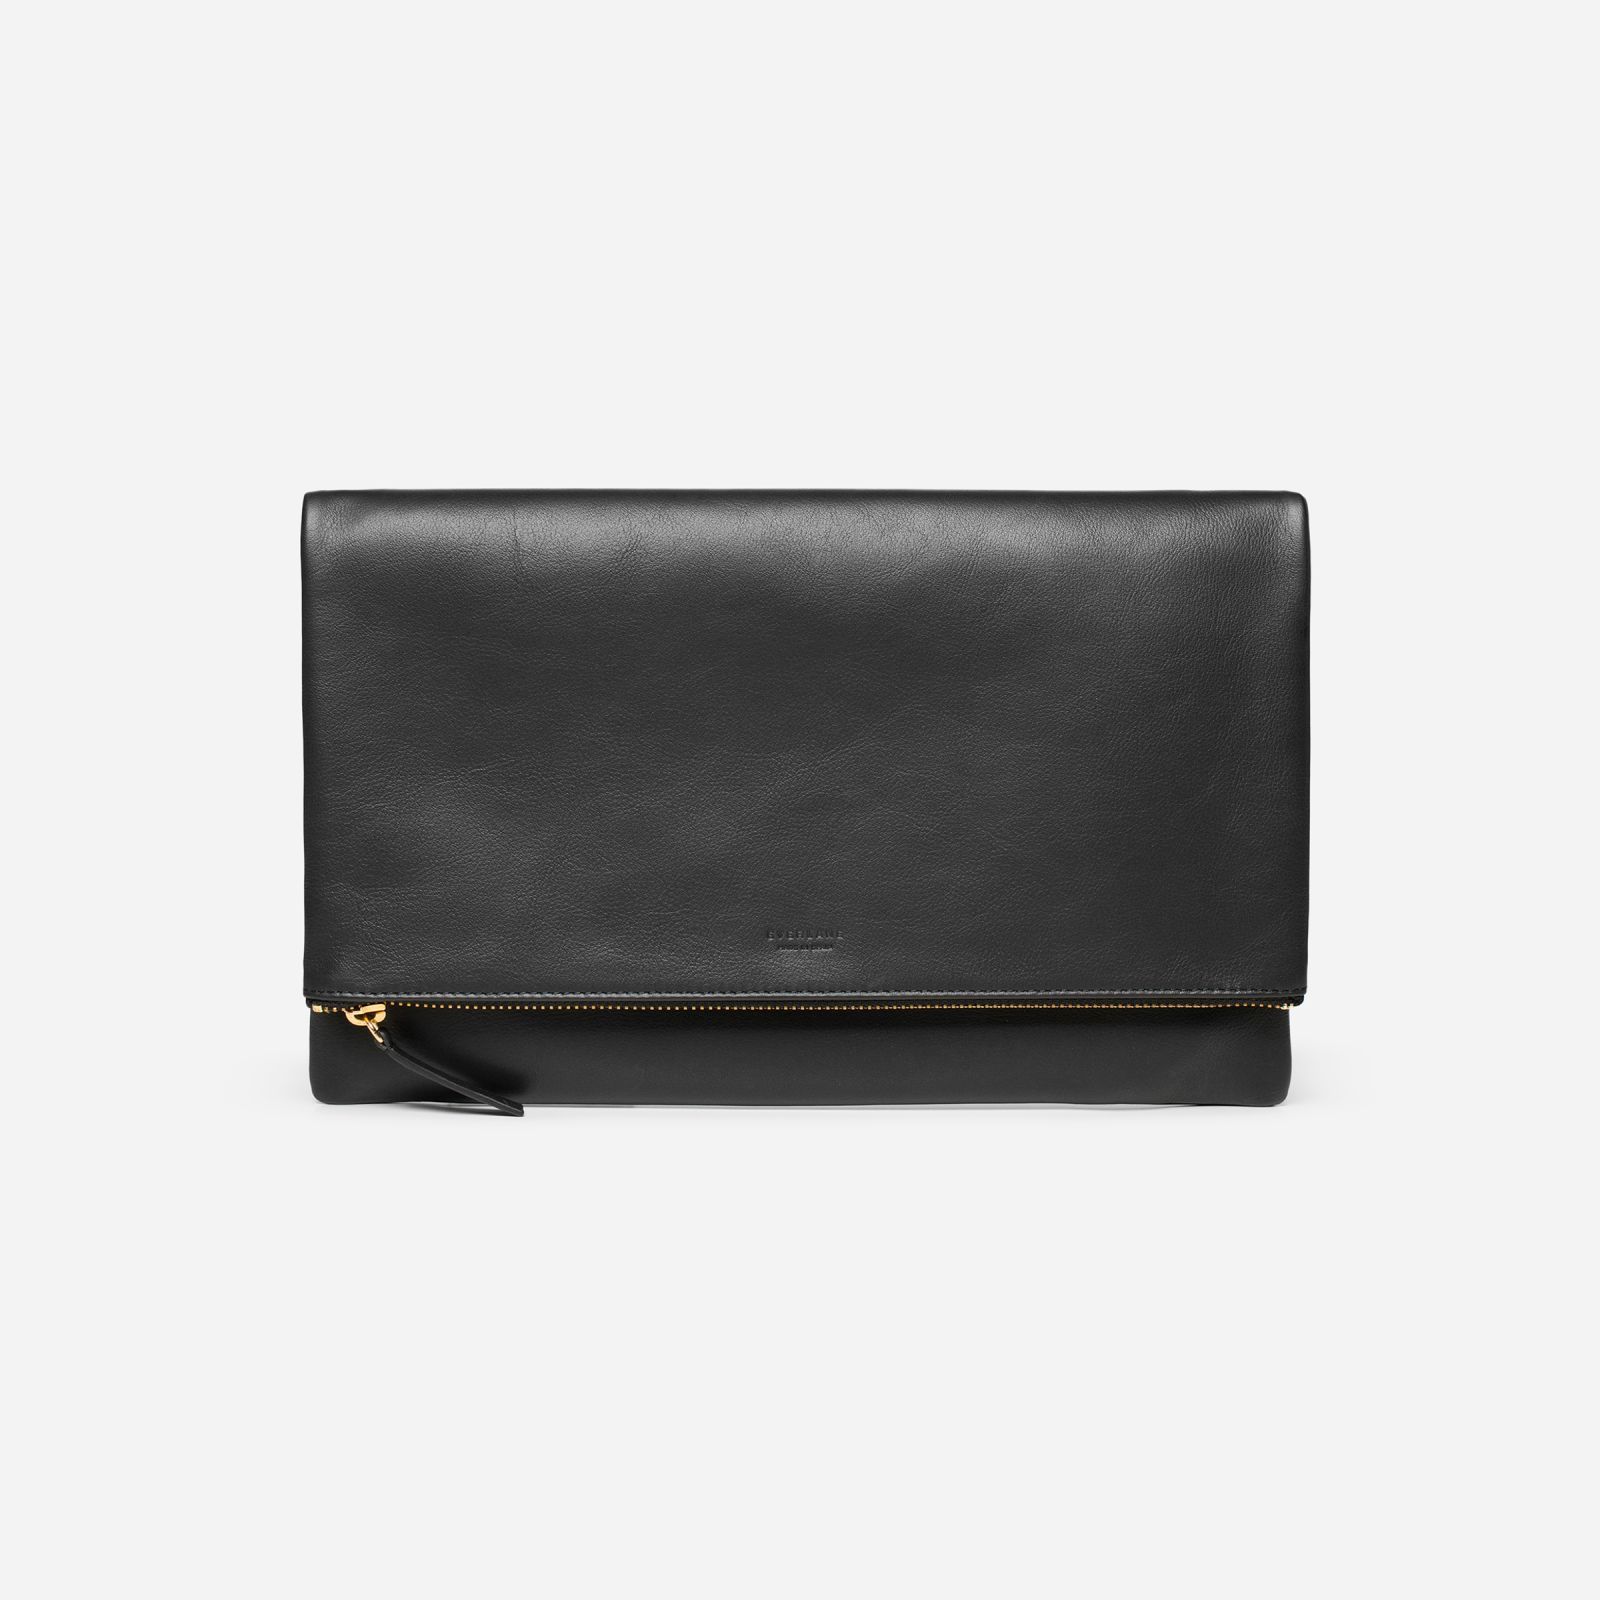 Women's Foldover Pouch by Everlane in Black | Everlane